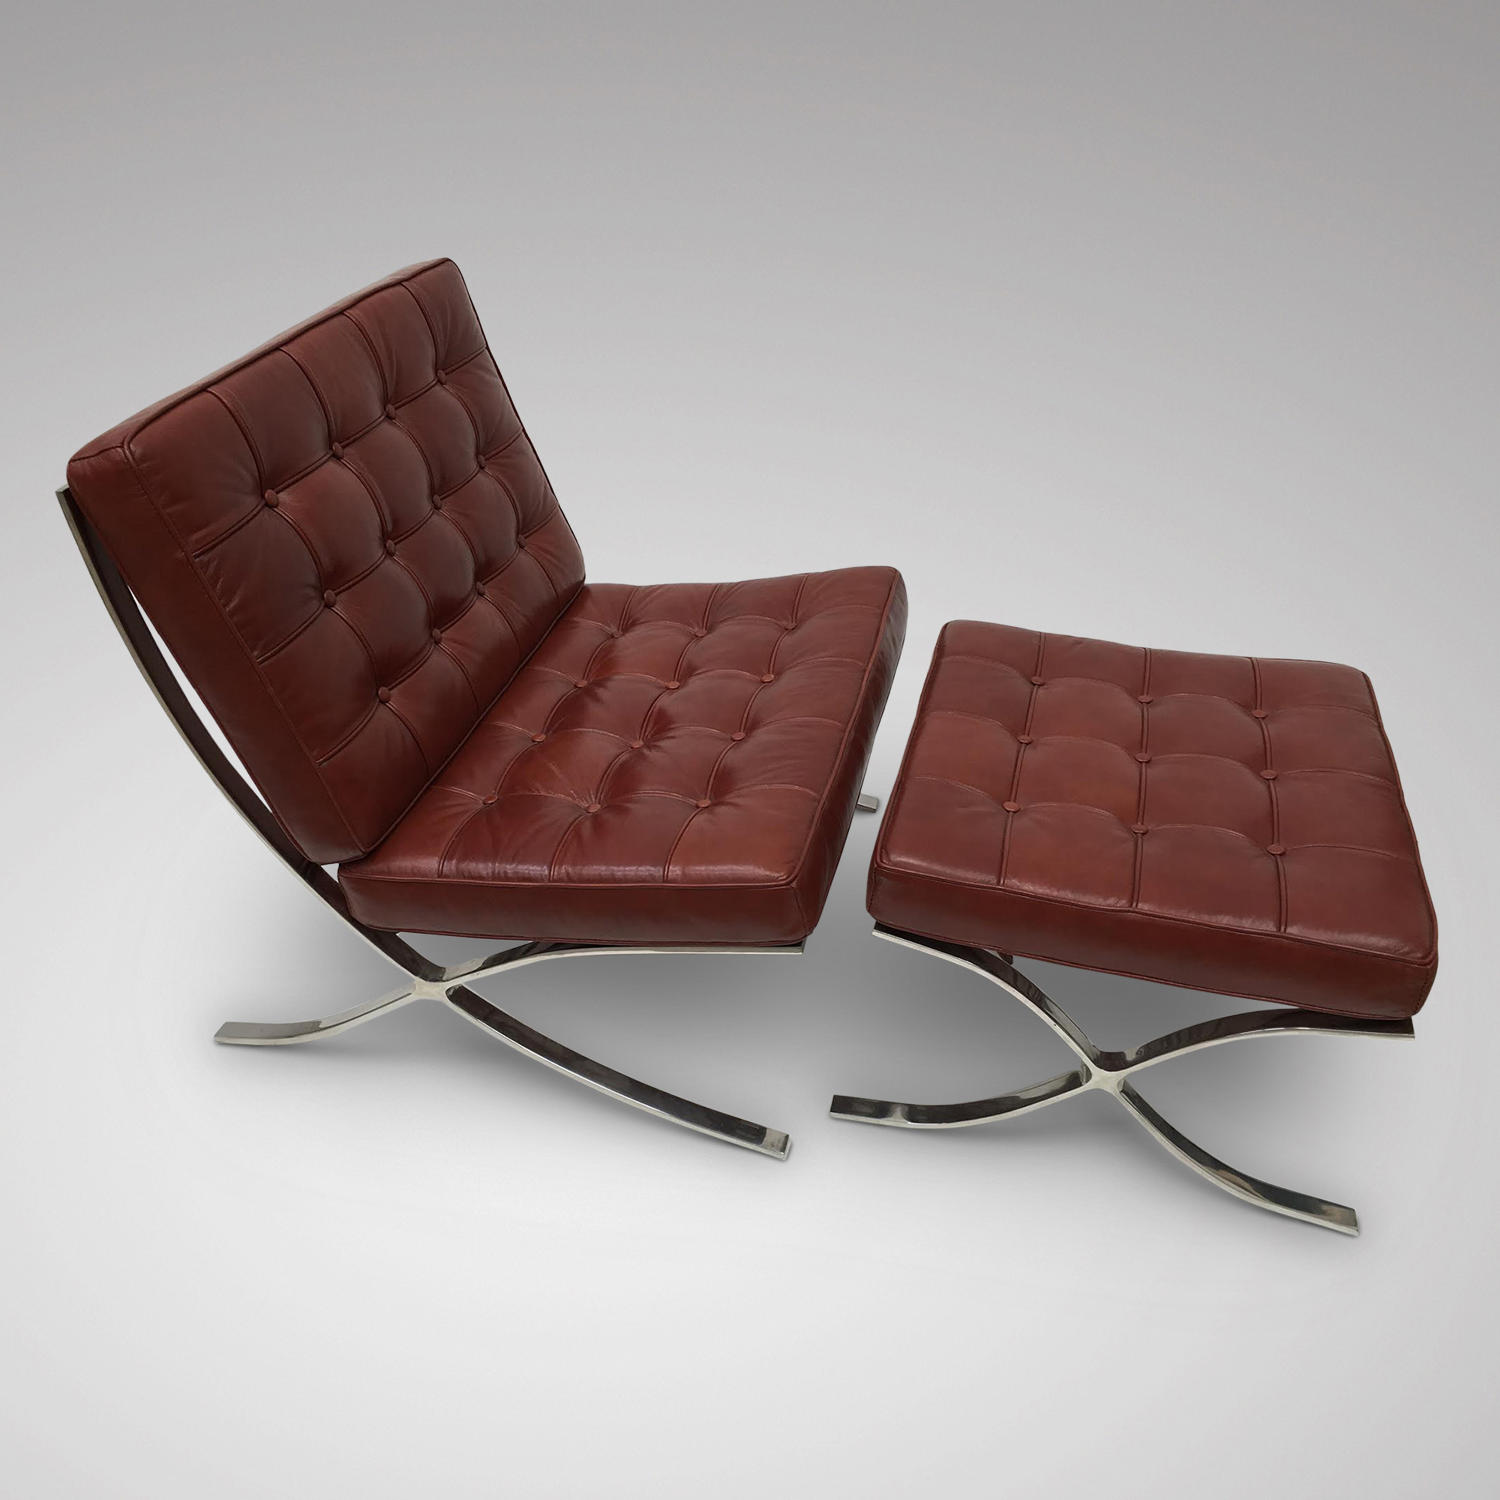 A MODERN LEATHER UPHOLSTERED CHAIR WITH MATCHING FOOTSTOOL